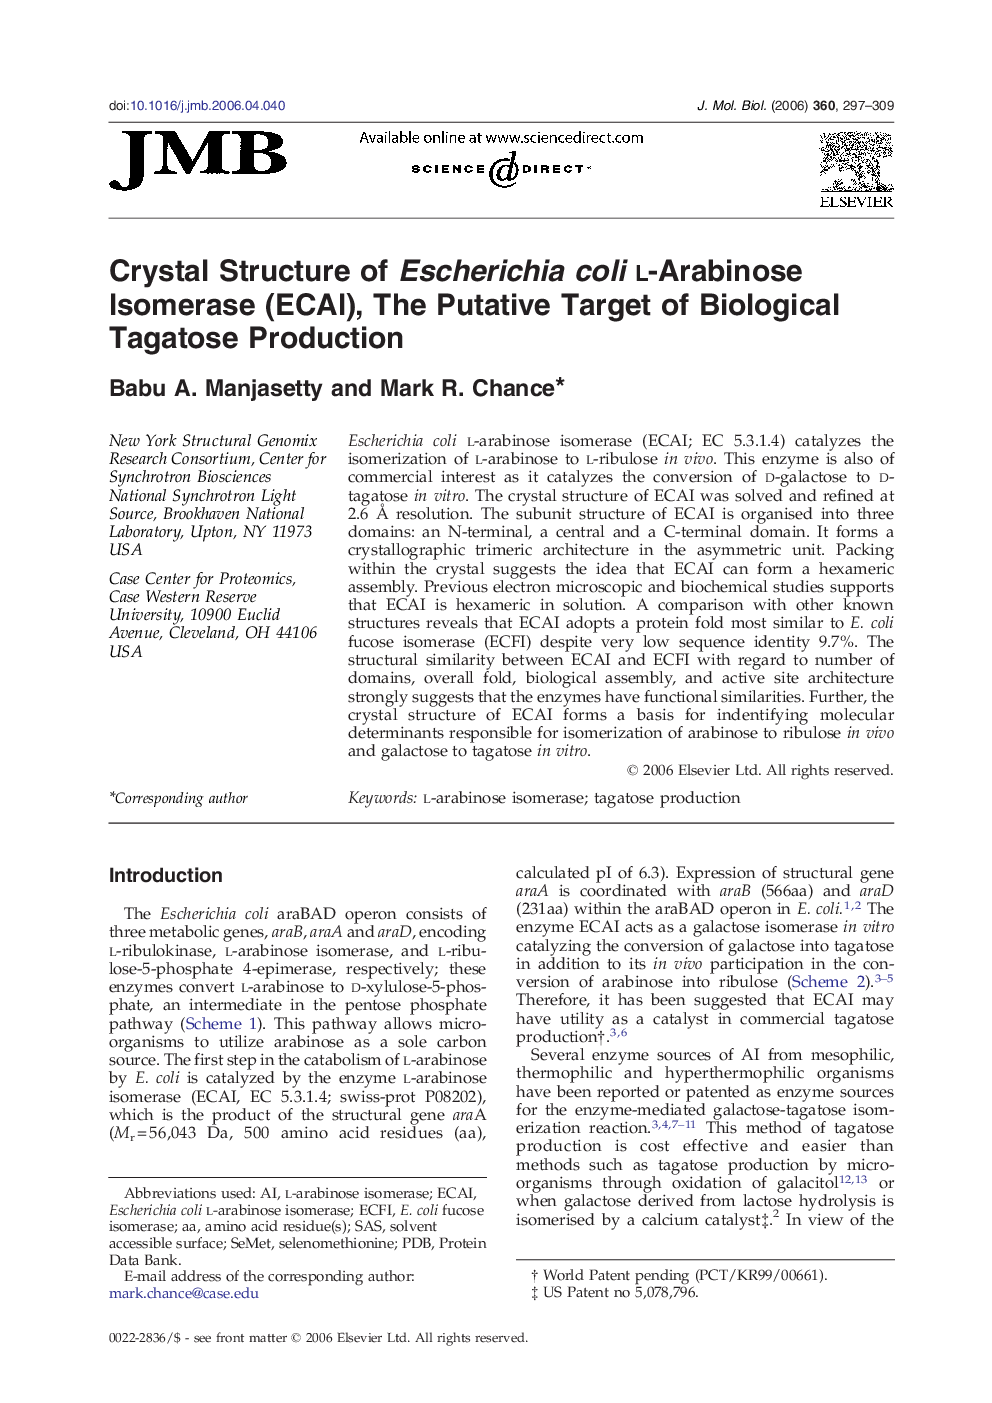 Crystal Structure of Escherichia coliL-Arabinose Isomerase (ECAI), The Putative Target of Biological Tagatose Production